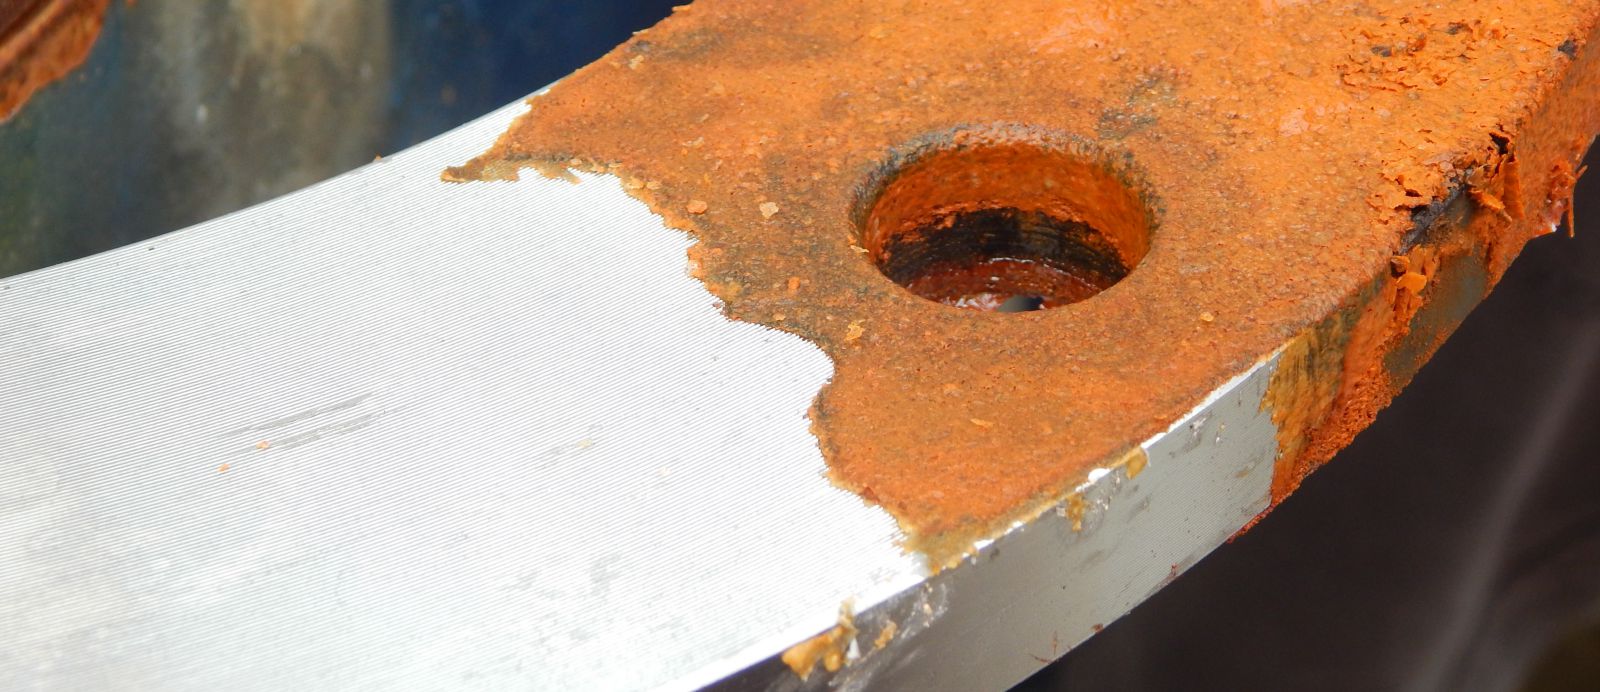 component with rust and anti-corrosion coating